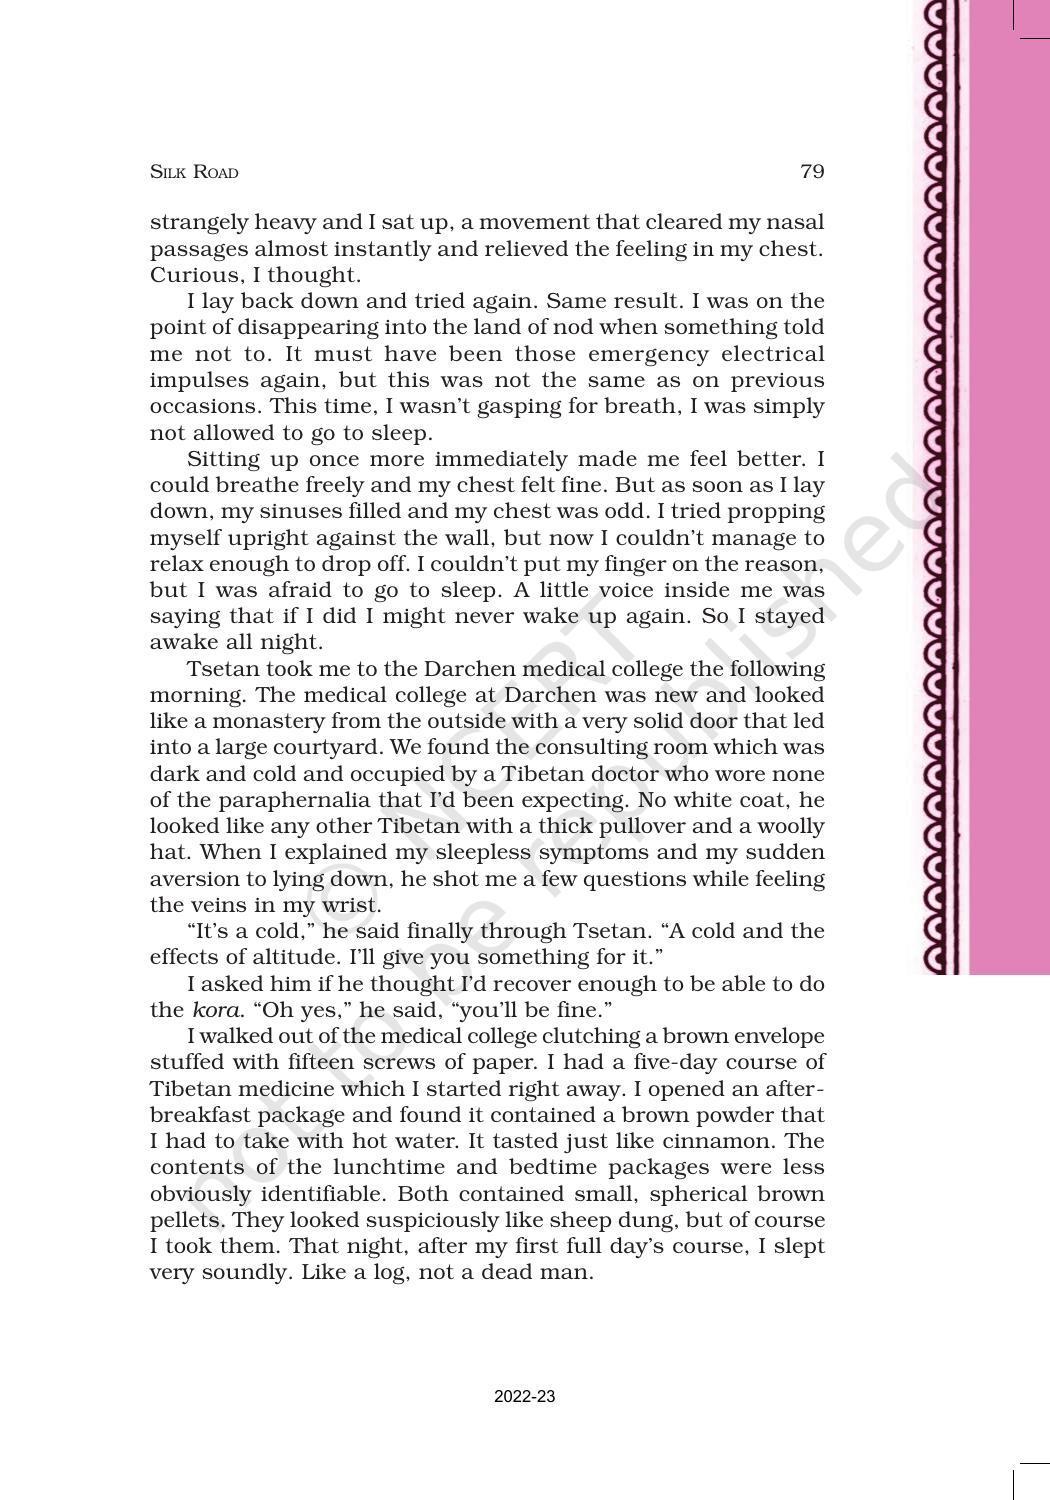 NCERT Book for Class 11 English Hornbill Chapter 8 Silk Road - Page 6